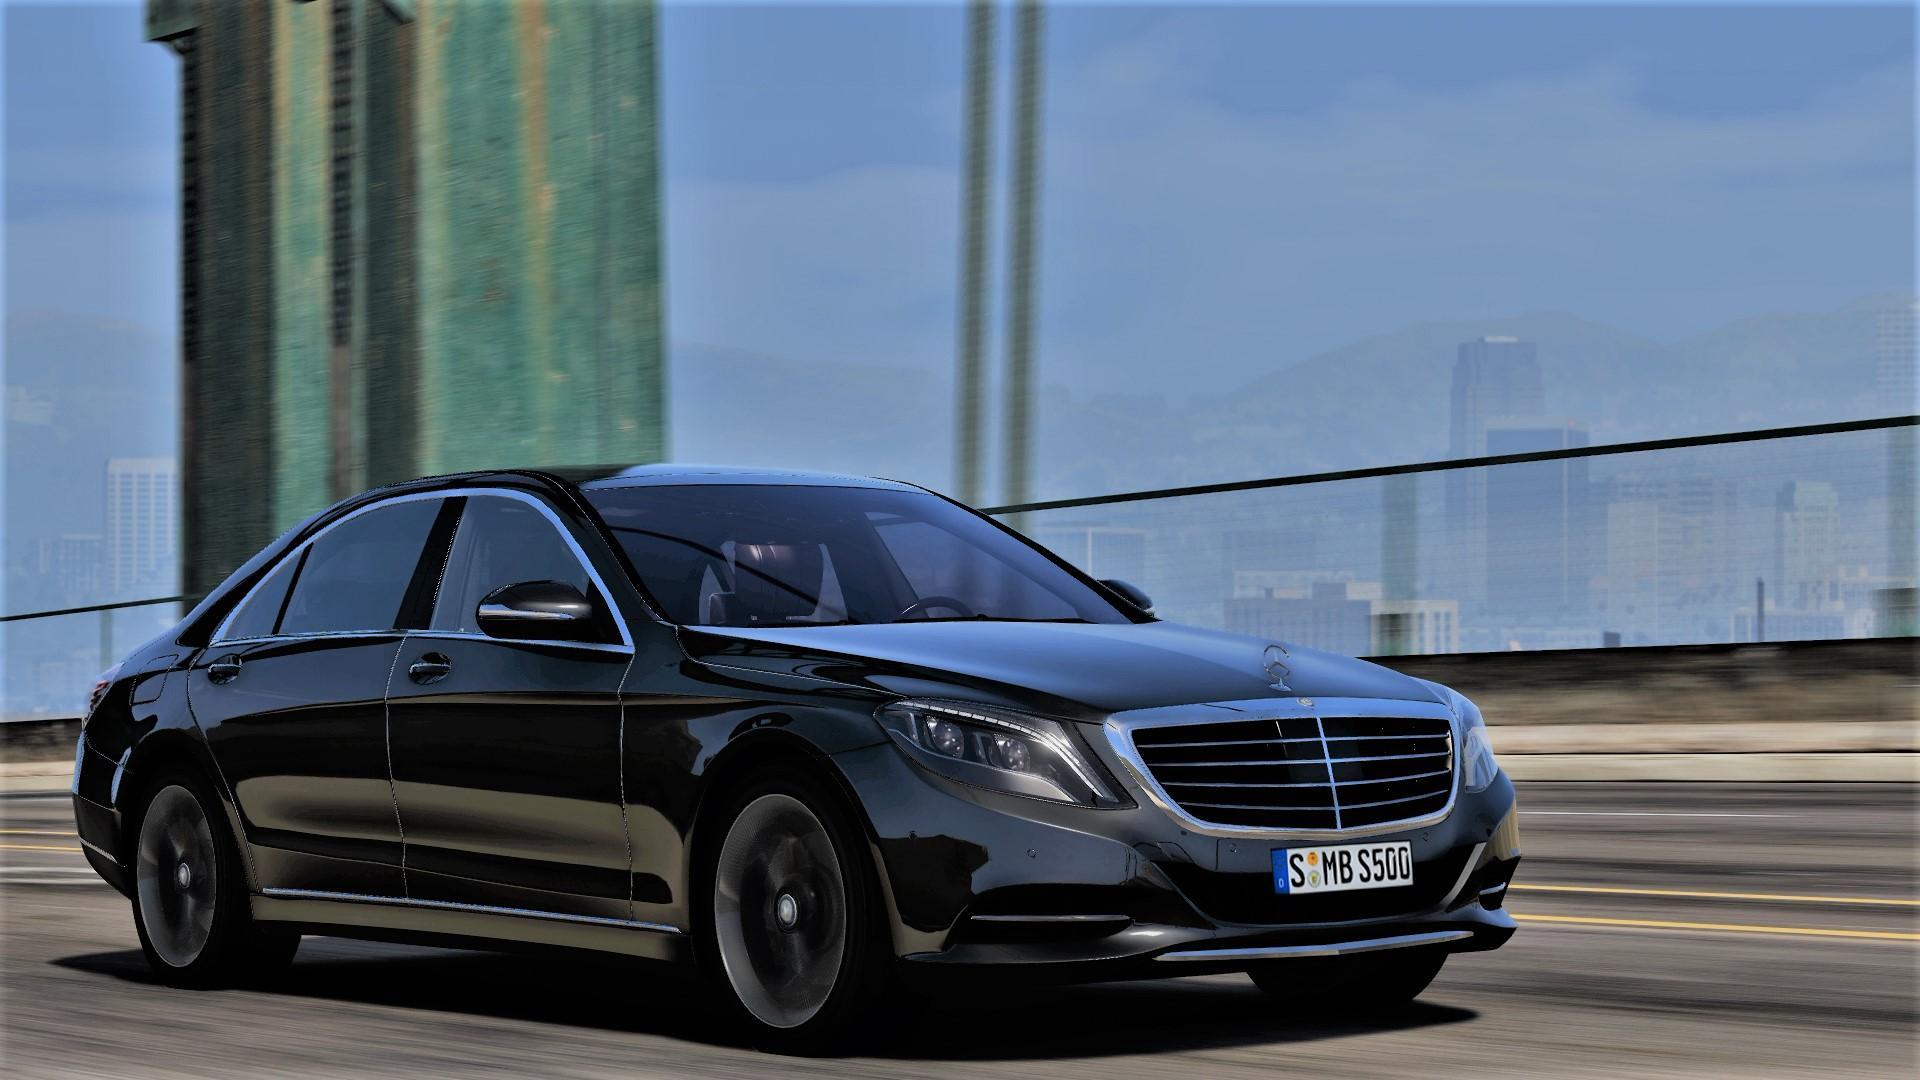 2014 Mercedes-Benz S500 L / S550 4MATIC (W222) [Add-On | Tuning]